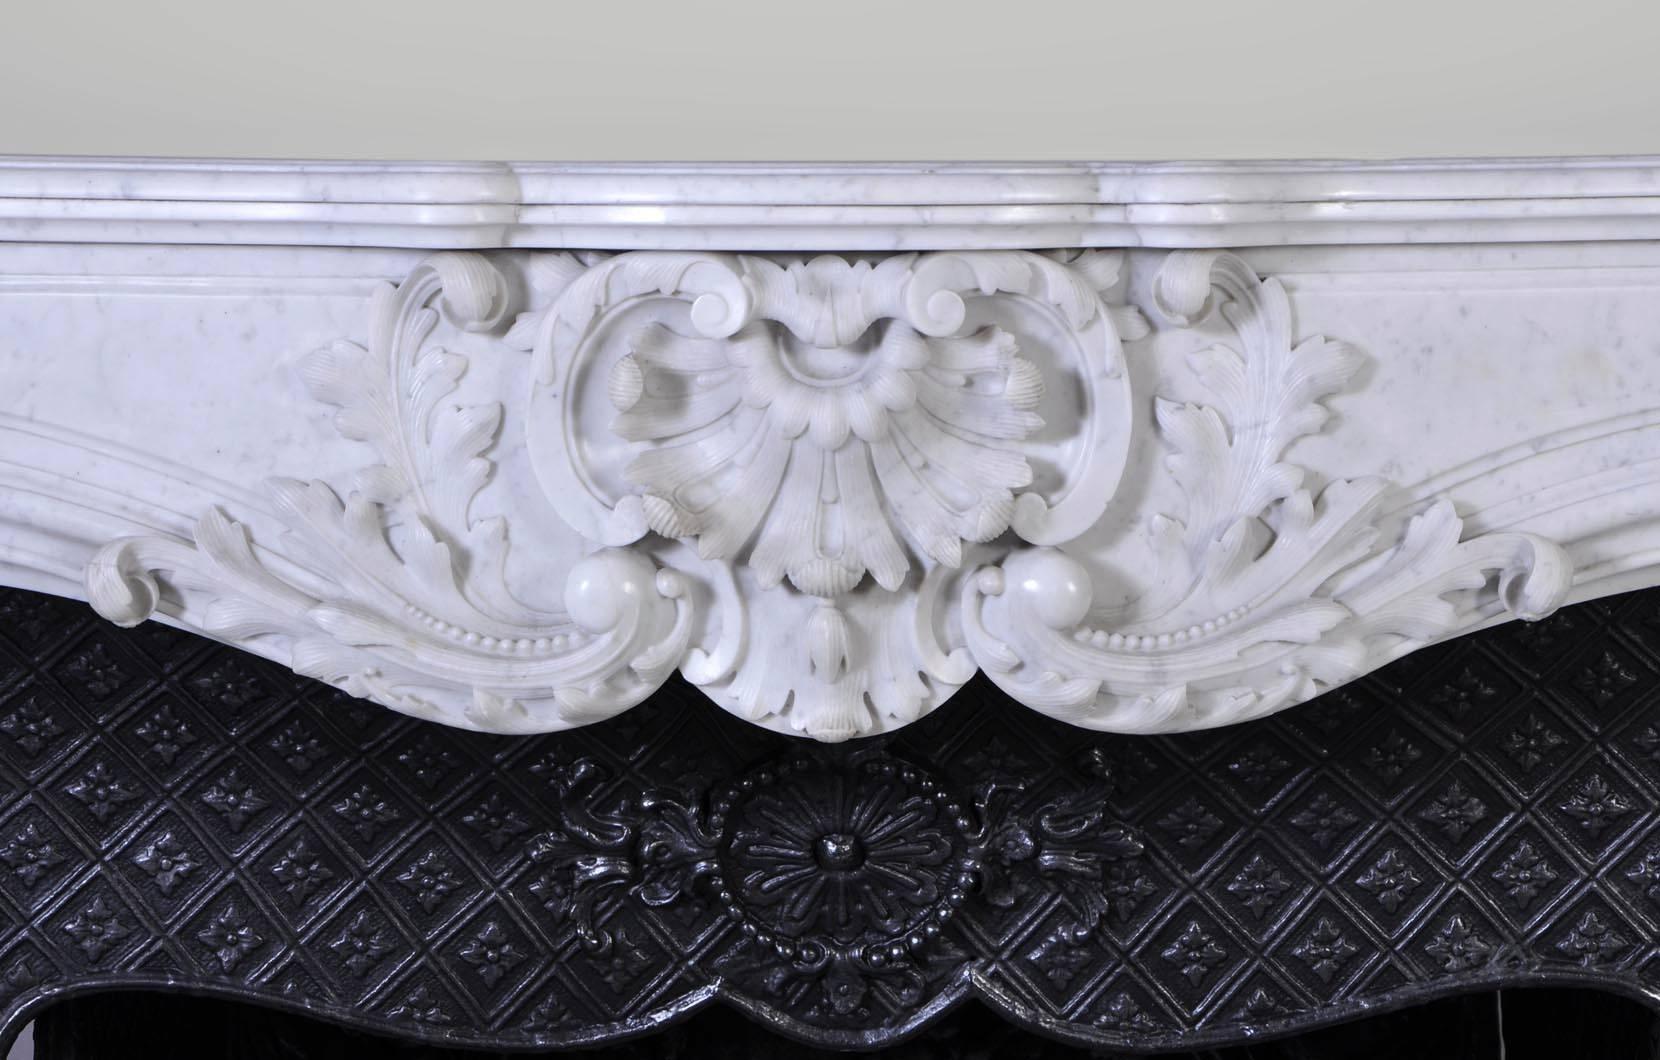 Antique Louis XV style fireplace in white Carrara marble realized during the 19th century. The opulent decor features foliaged reversed shells, acanthus leaves, medallions, scrolls. The lines are contoured and shapes are curved. 

The fireplace